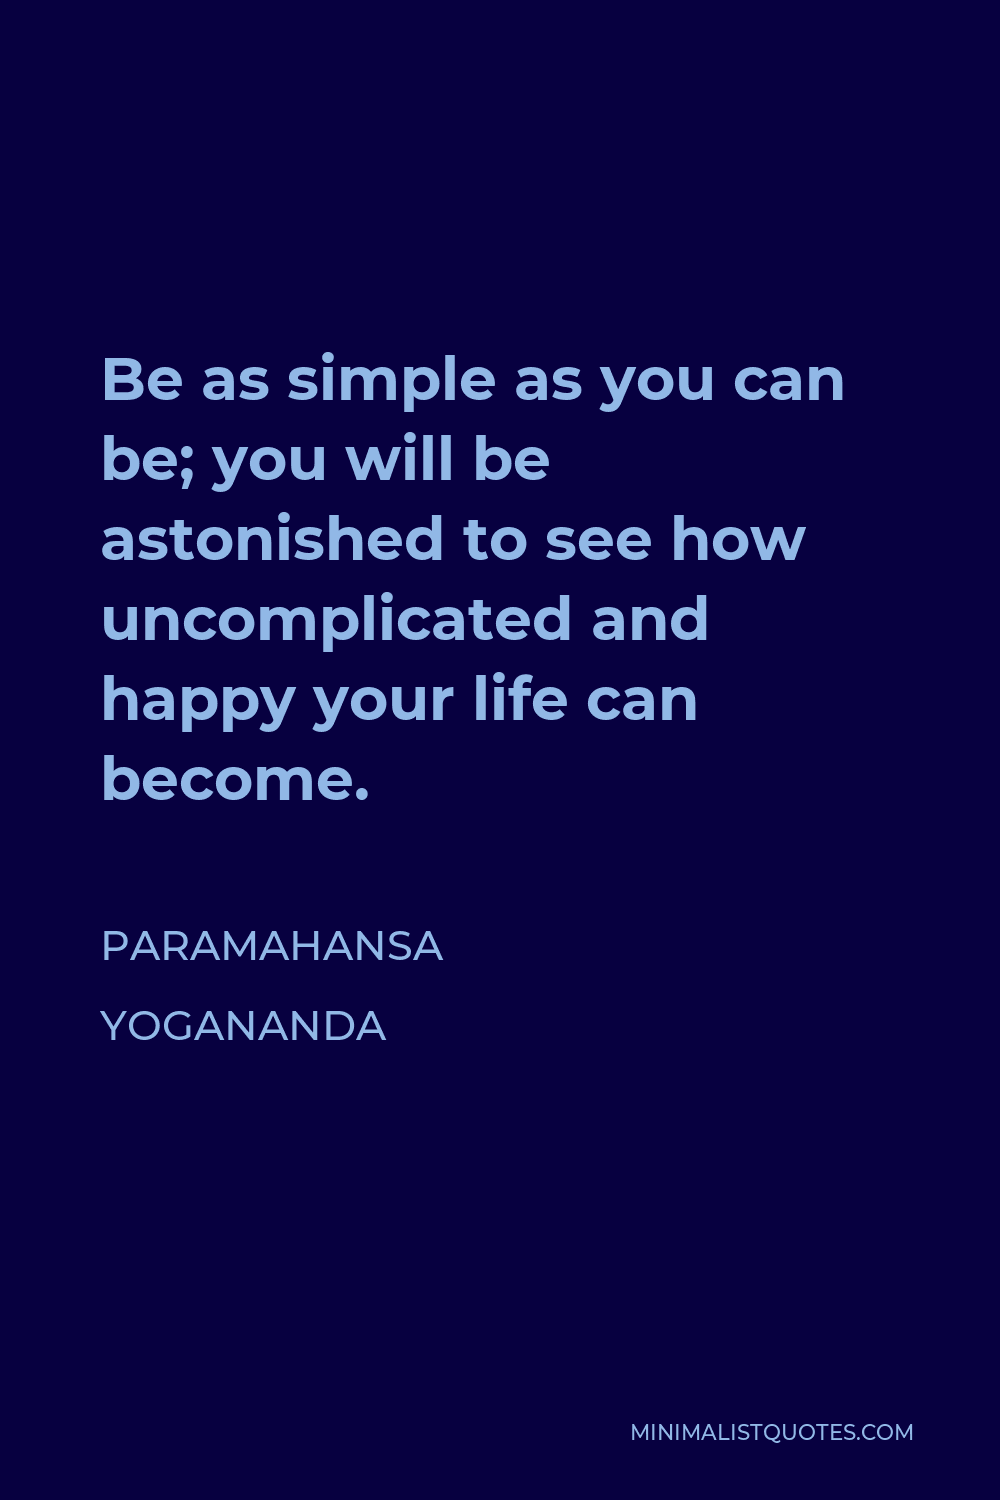 Paramahansa Yogananda Quote - Be as simple as you can be; you will be astonished to see how uncomplicated and happy your life can become.